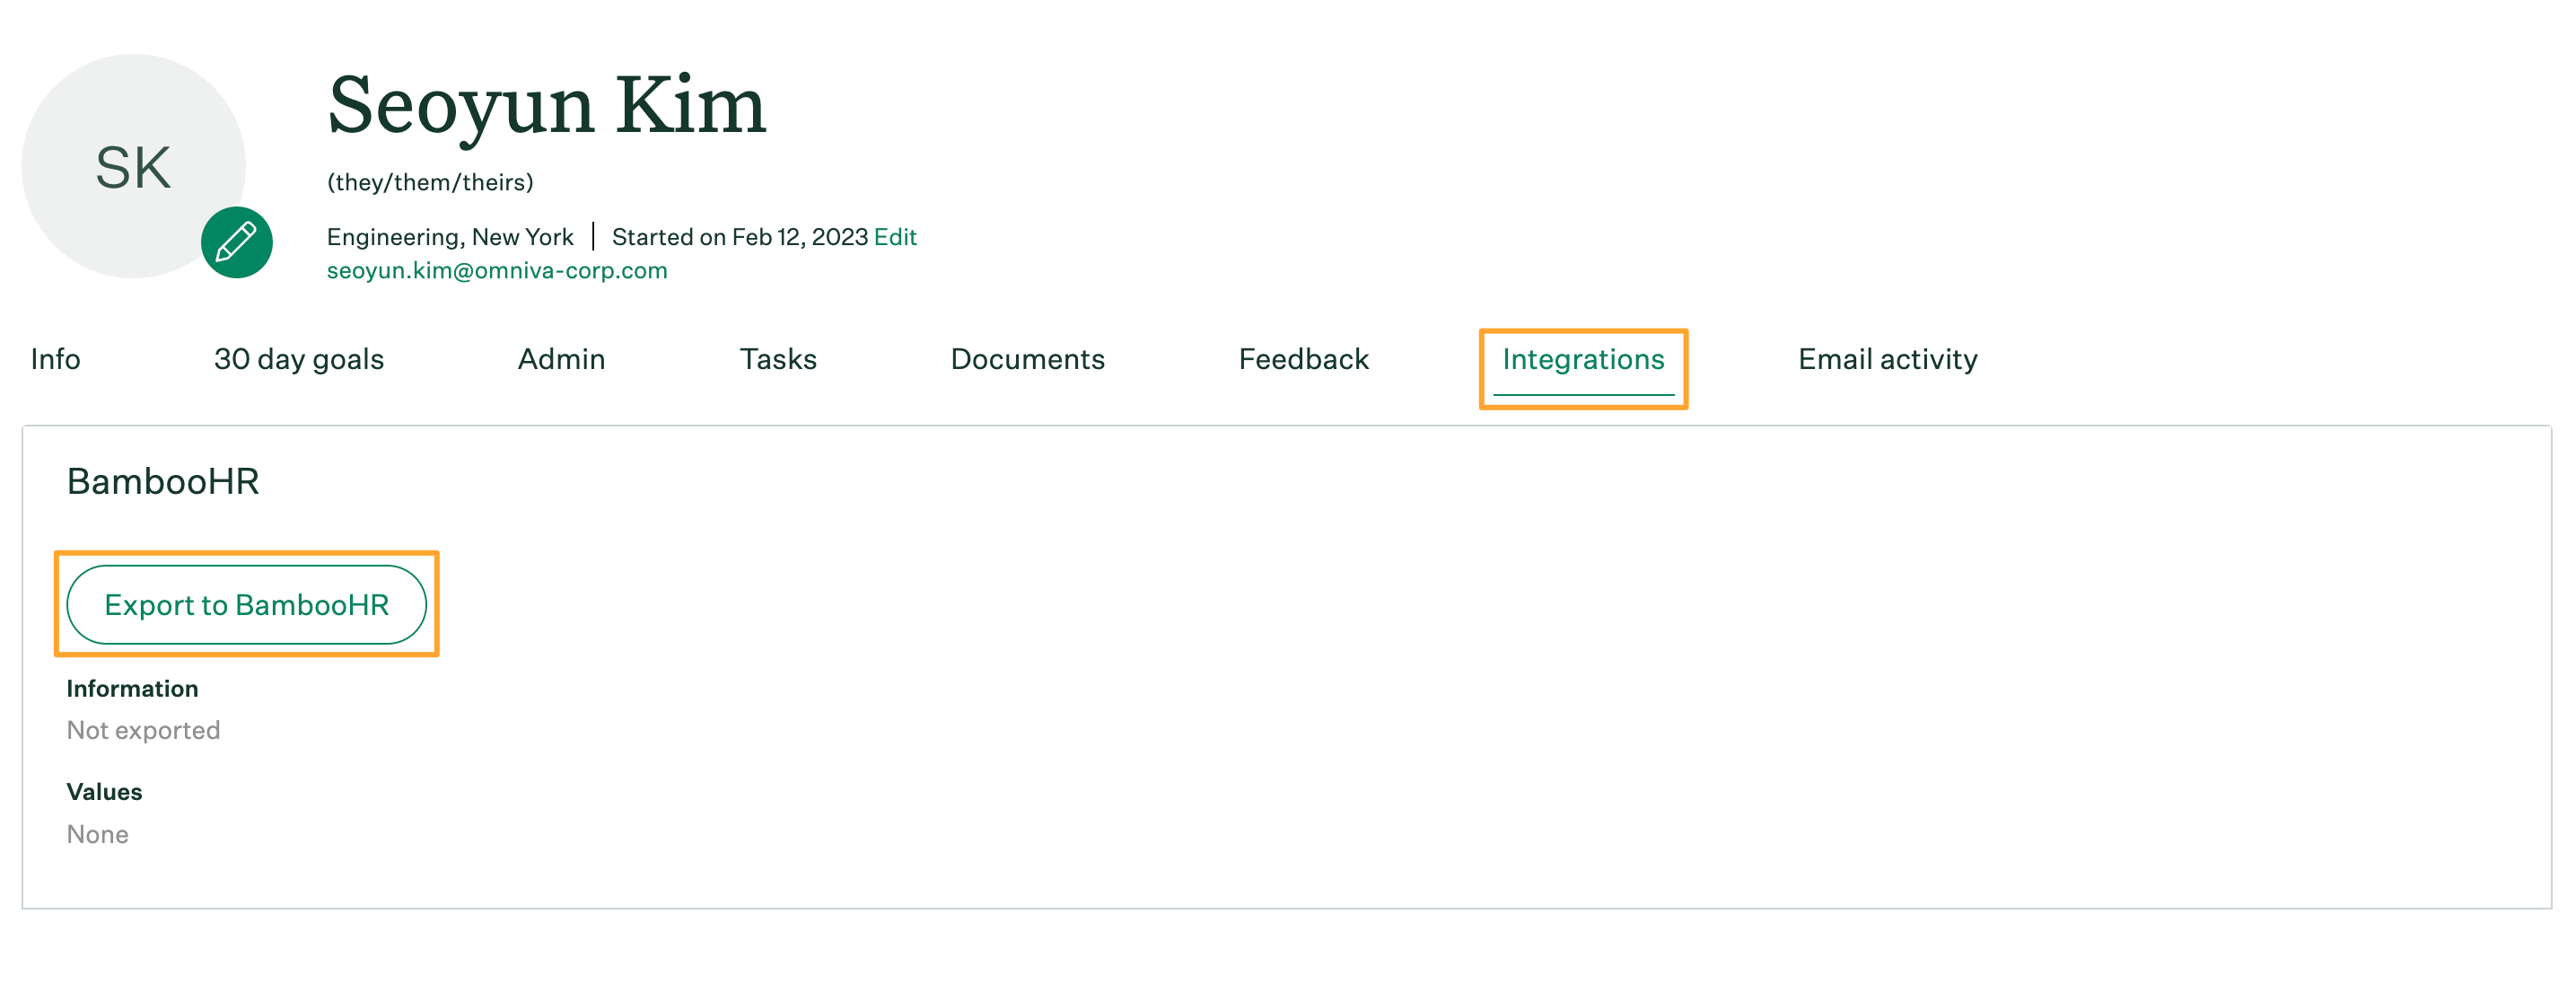 Employee profile integrations tab with Export to BambooHR button highlighted